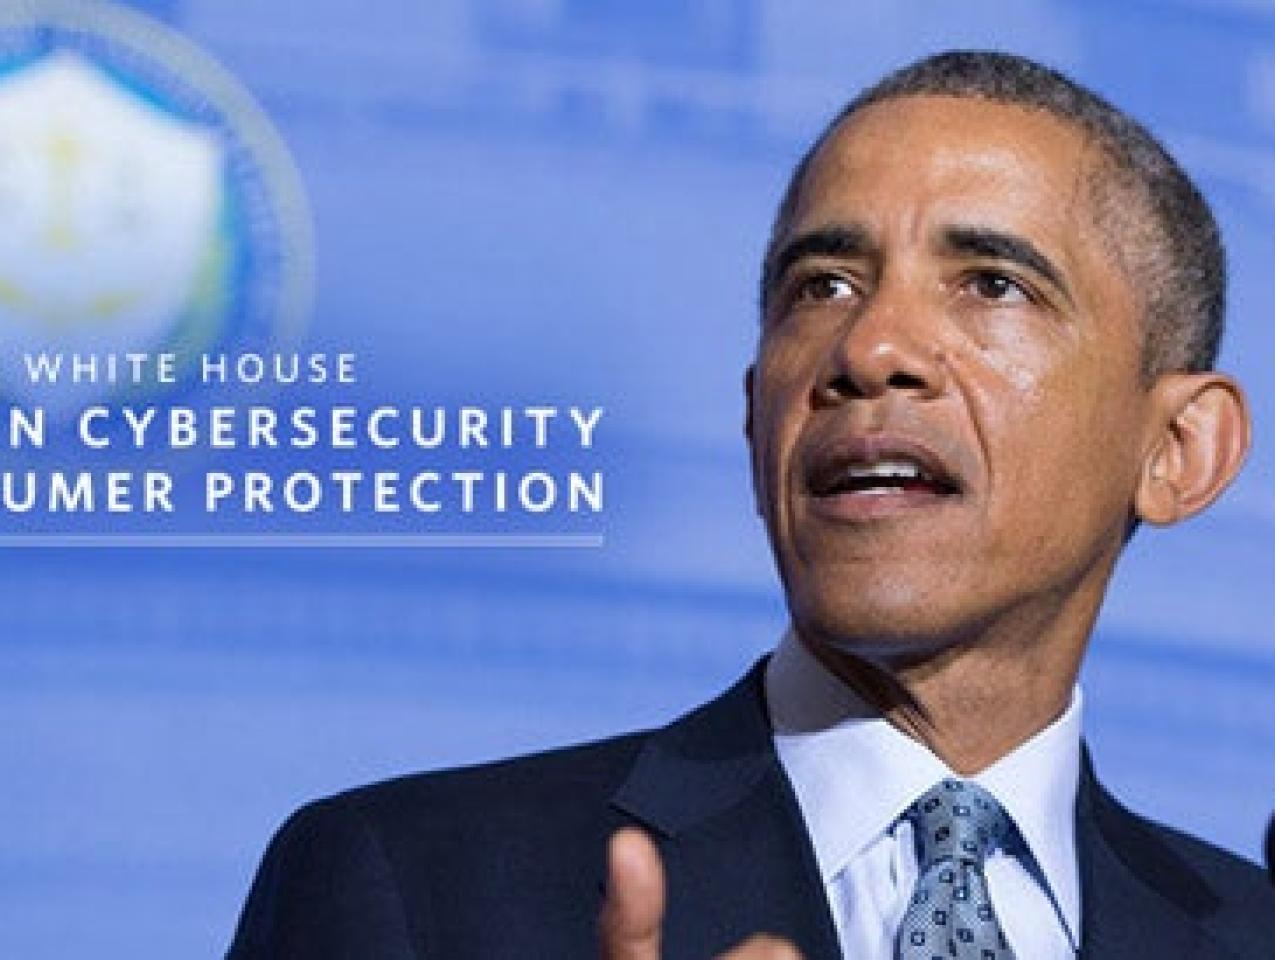 Image for White House Summit on Cybersecurity and Consumer Protection